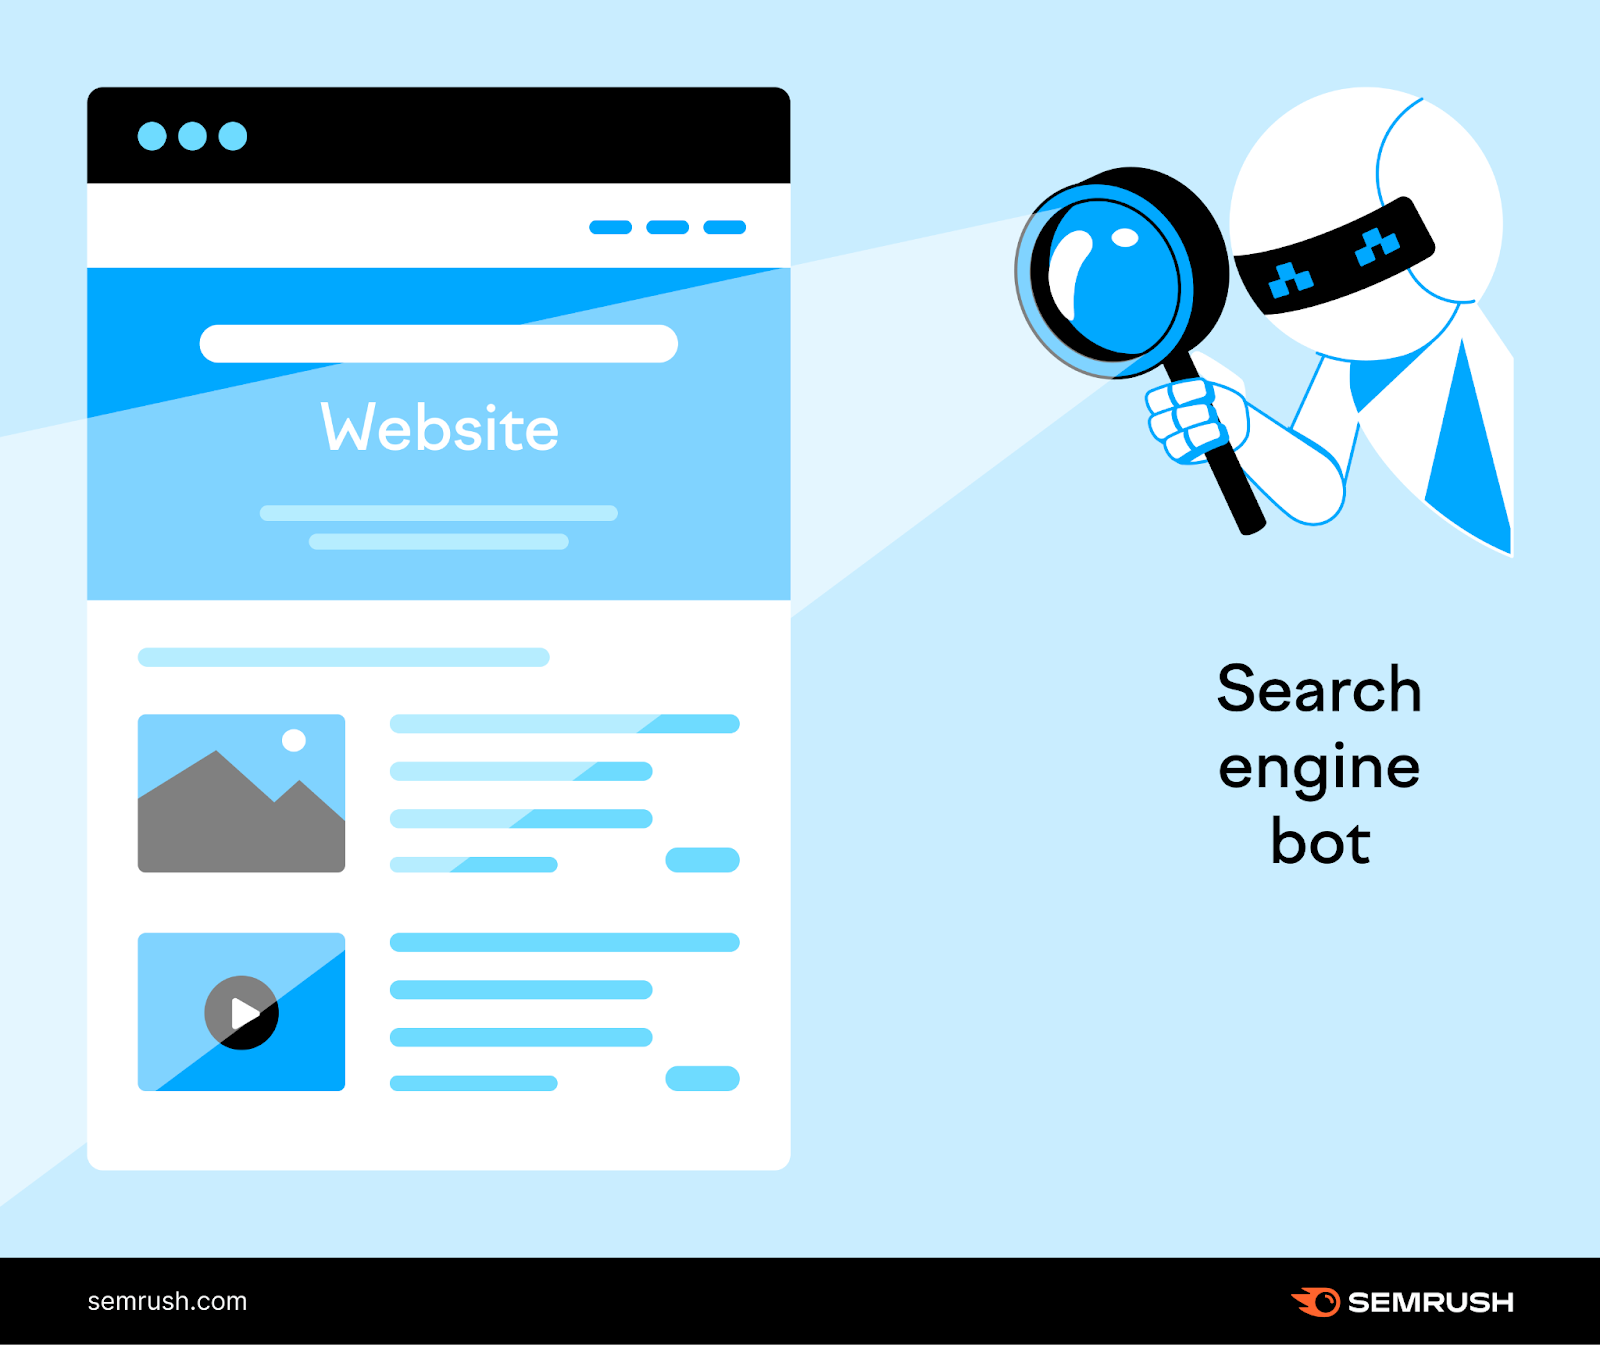 infographic by Semrush illustrating a website and search engine bot